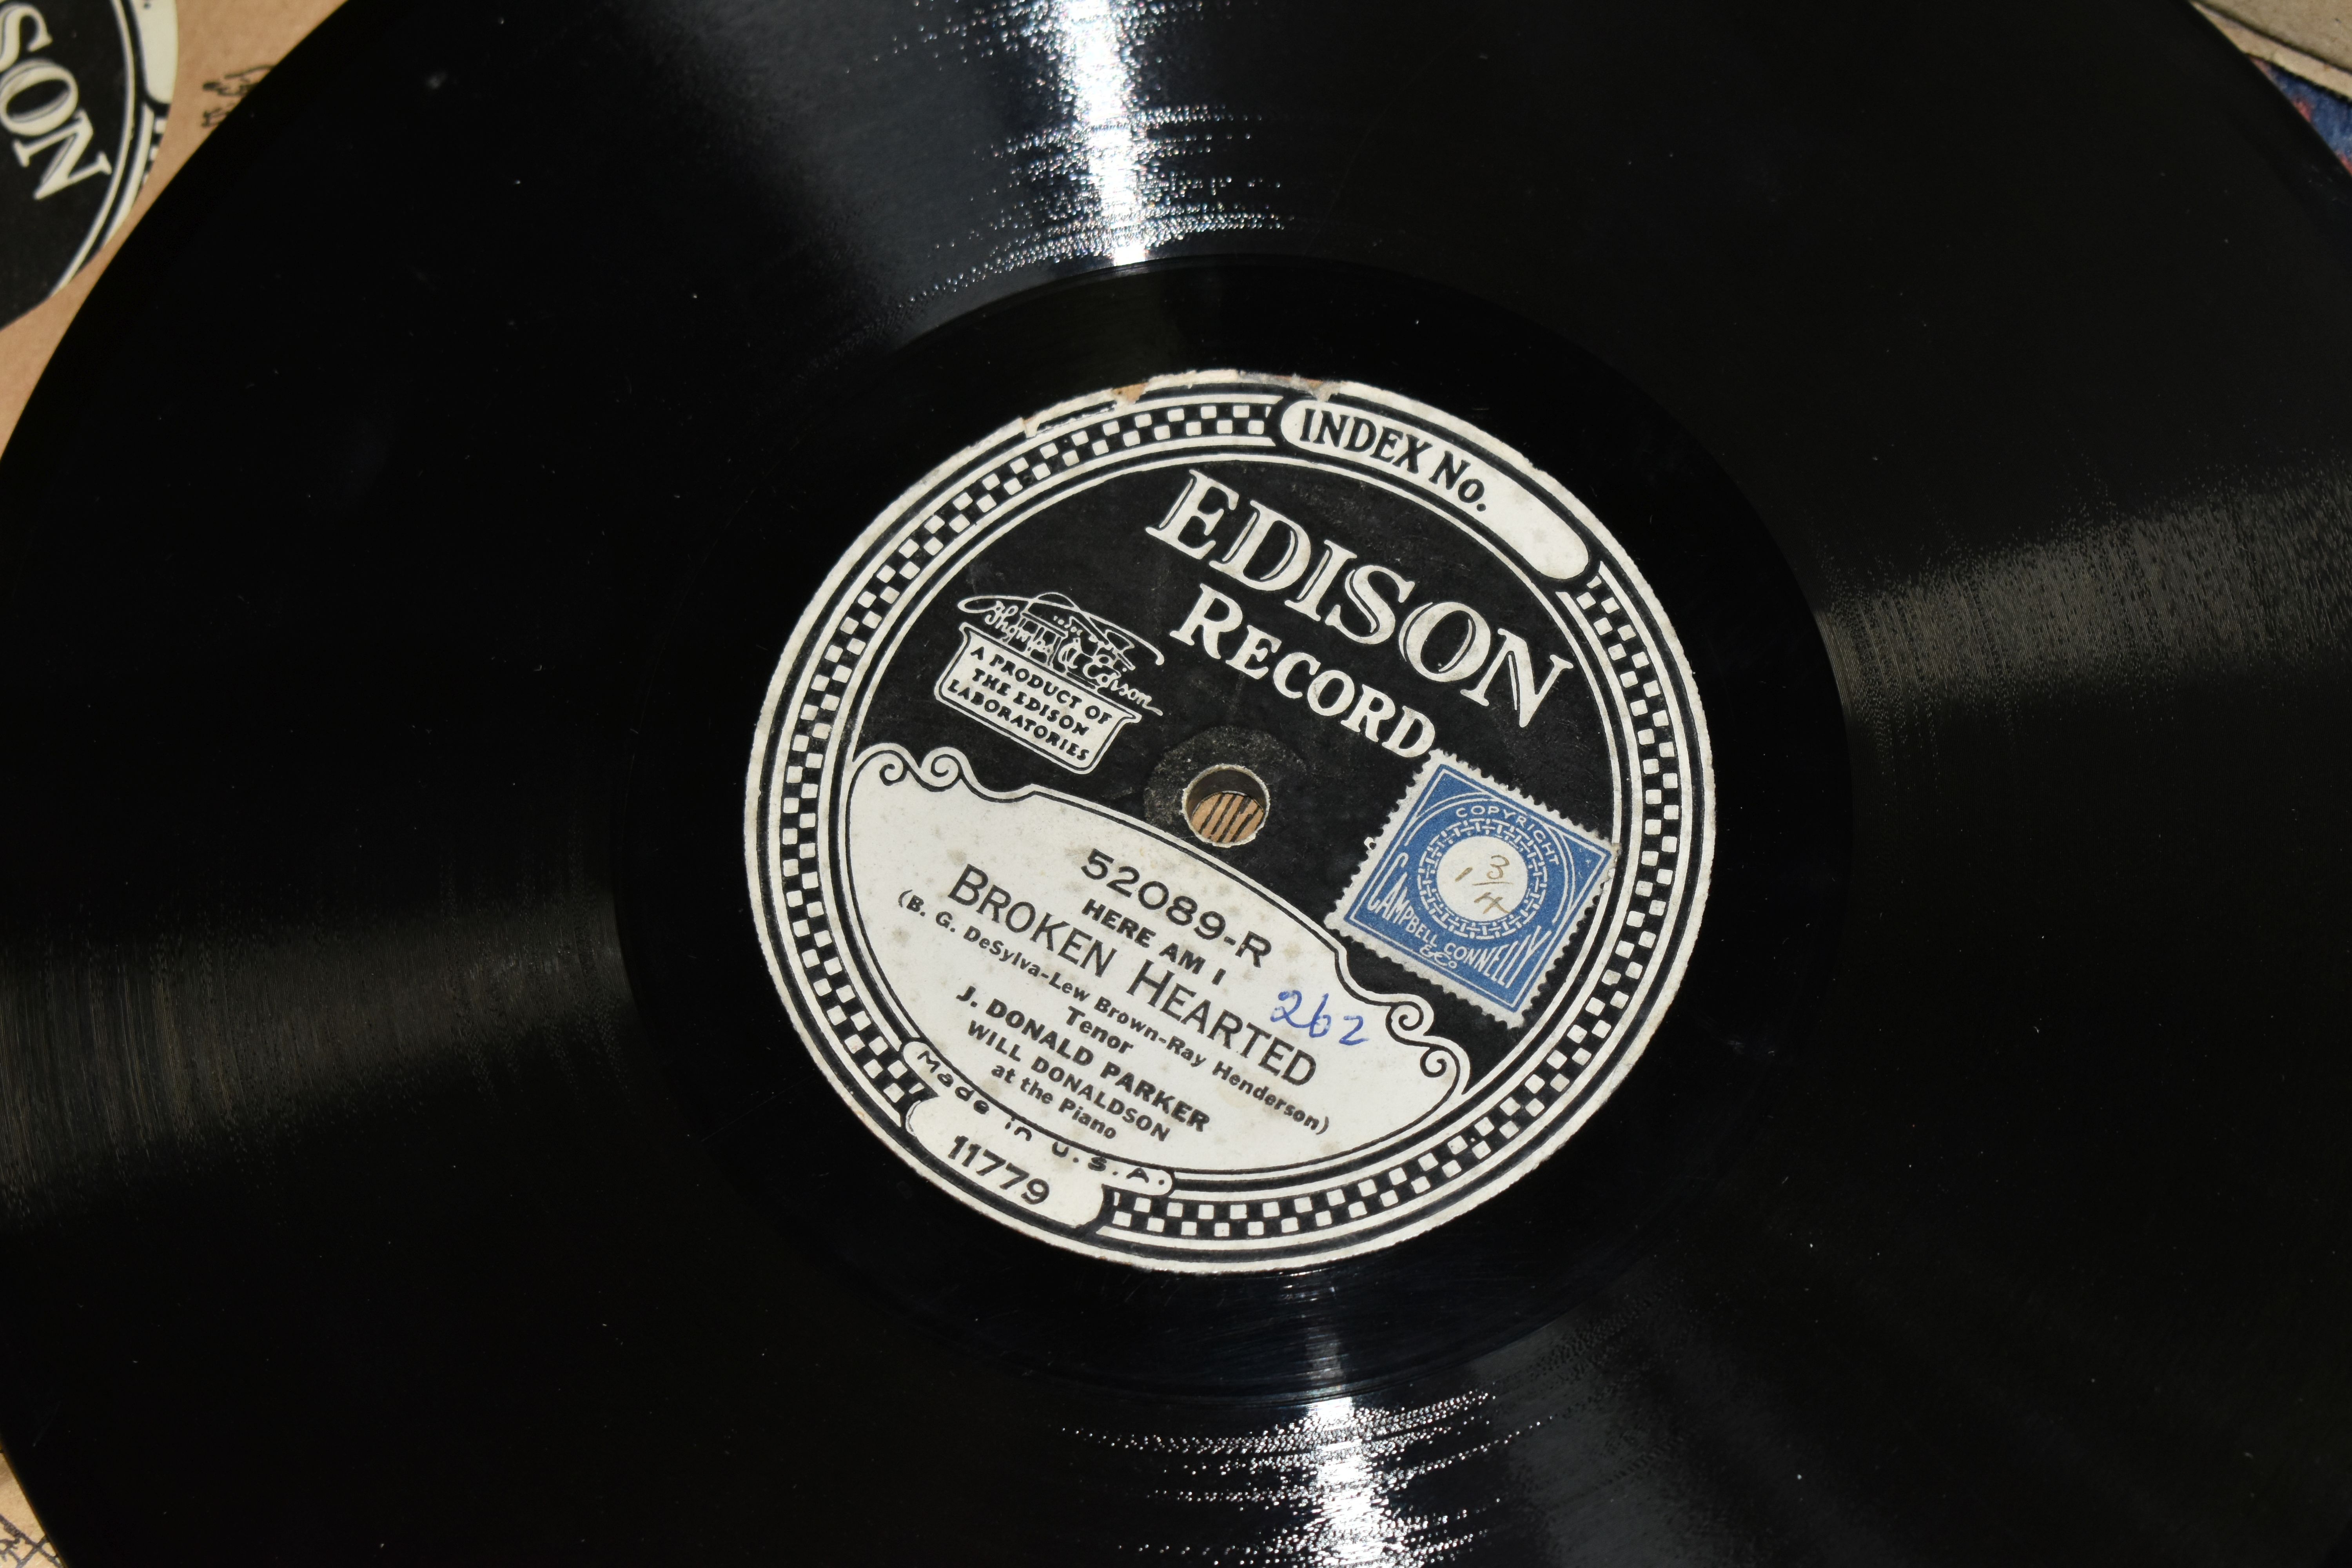 TWO BOXES OF EDISON DISC RECORDS, styles include orchestral, ragtime, music hall etc - Image 6 of 6